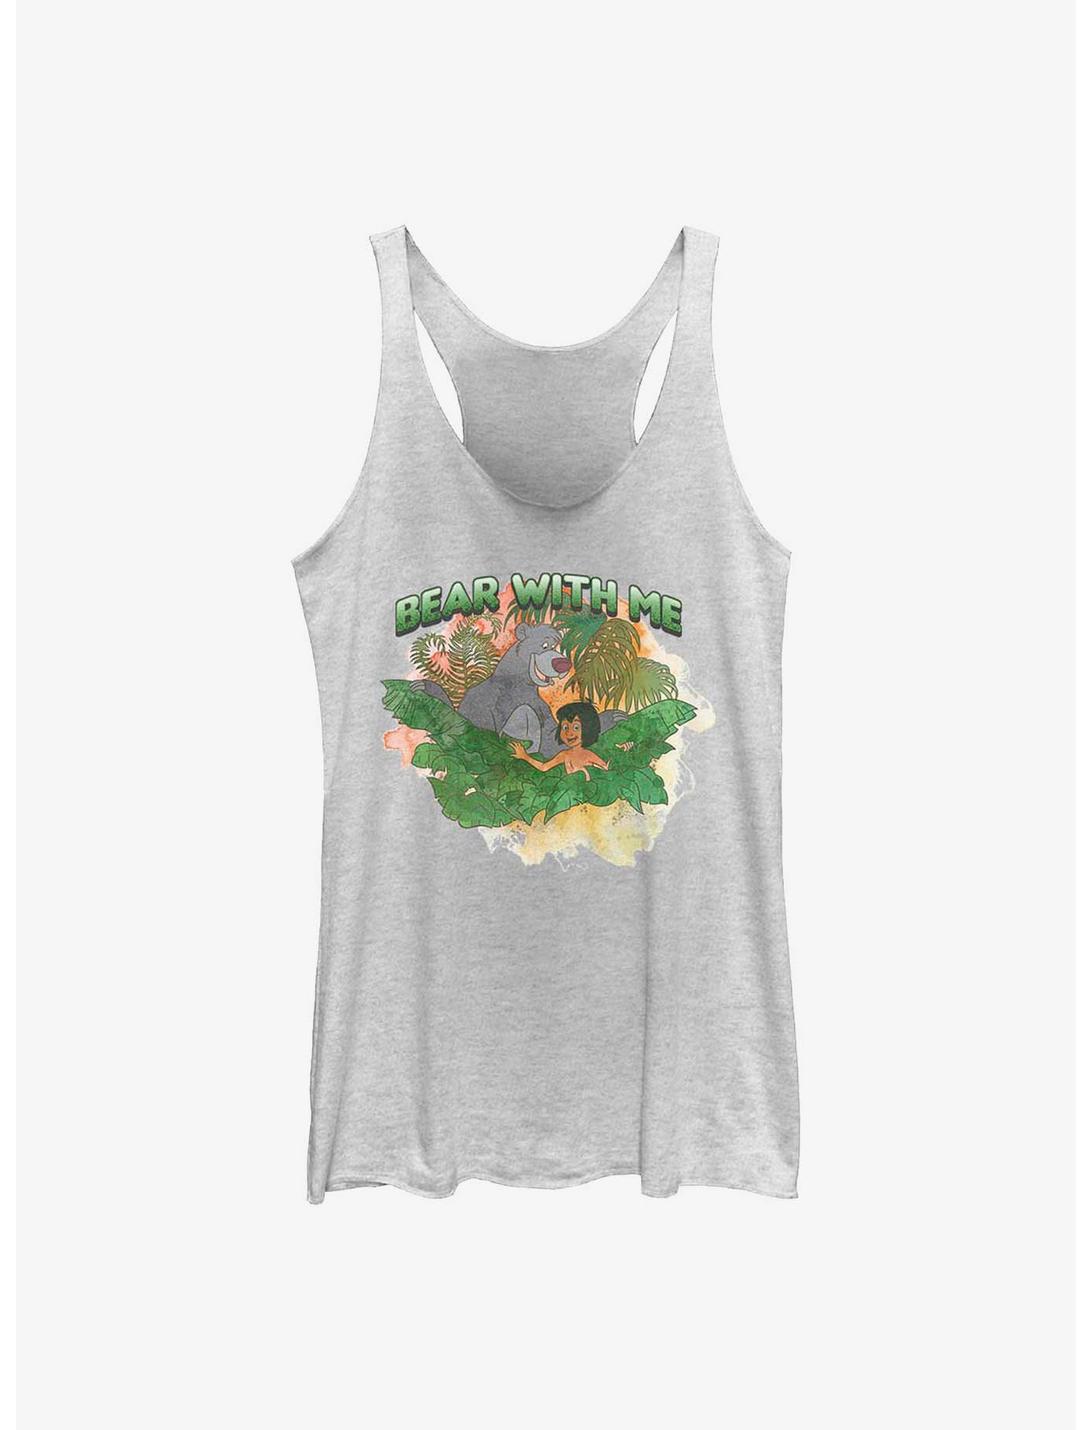 Disney The Jungle Book Bear With Me Girls Tank, WHITE HTR, hi-res